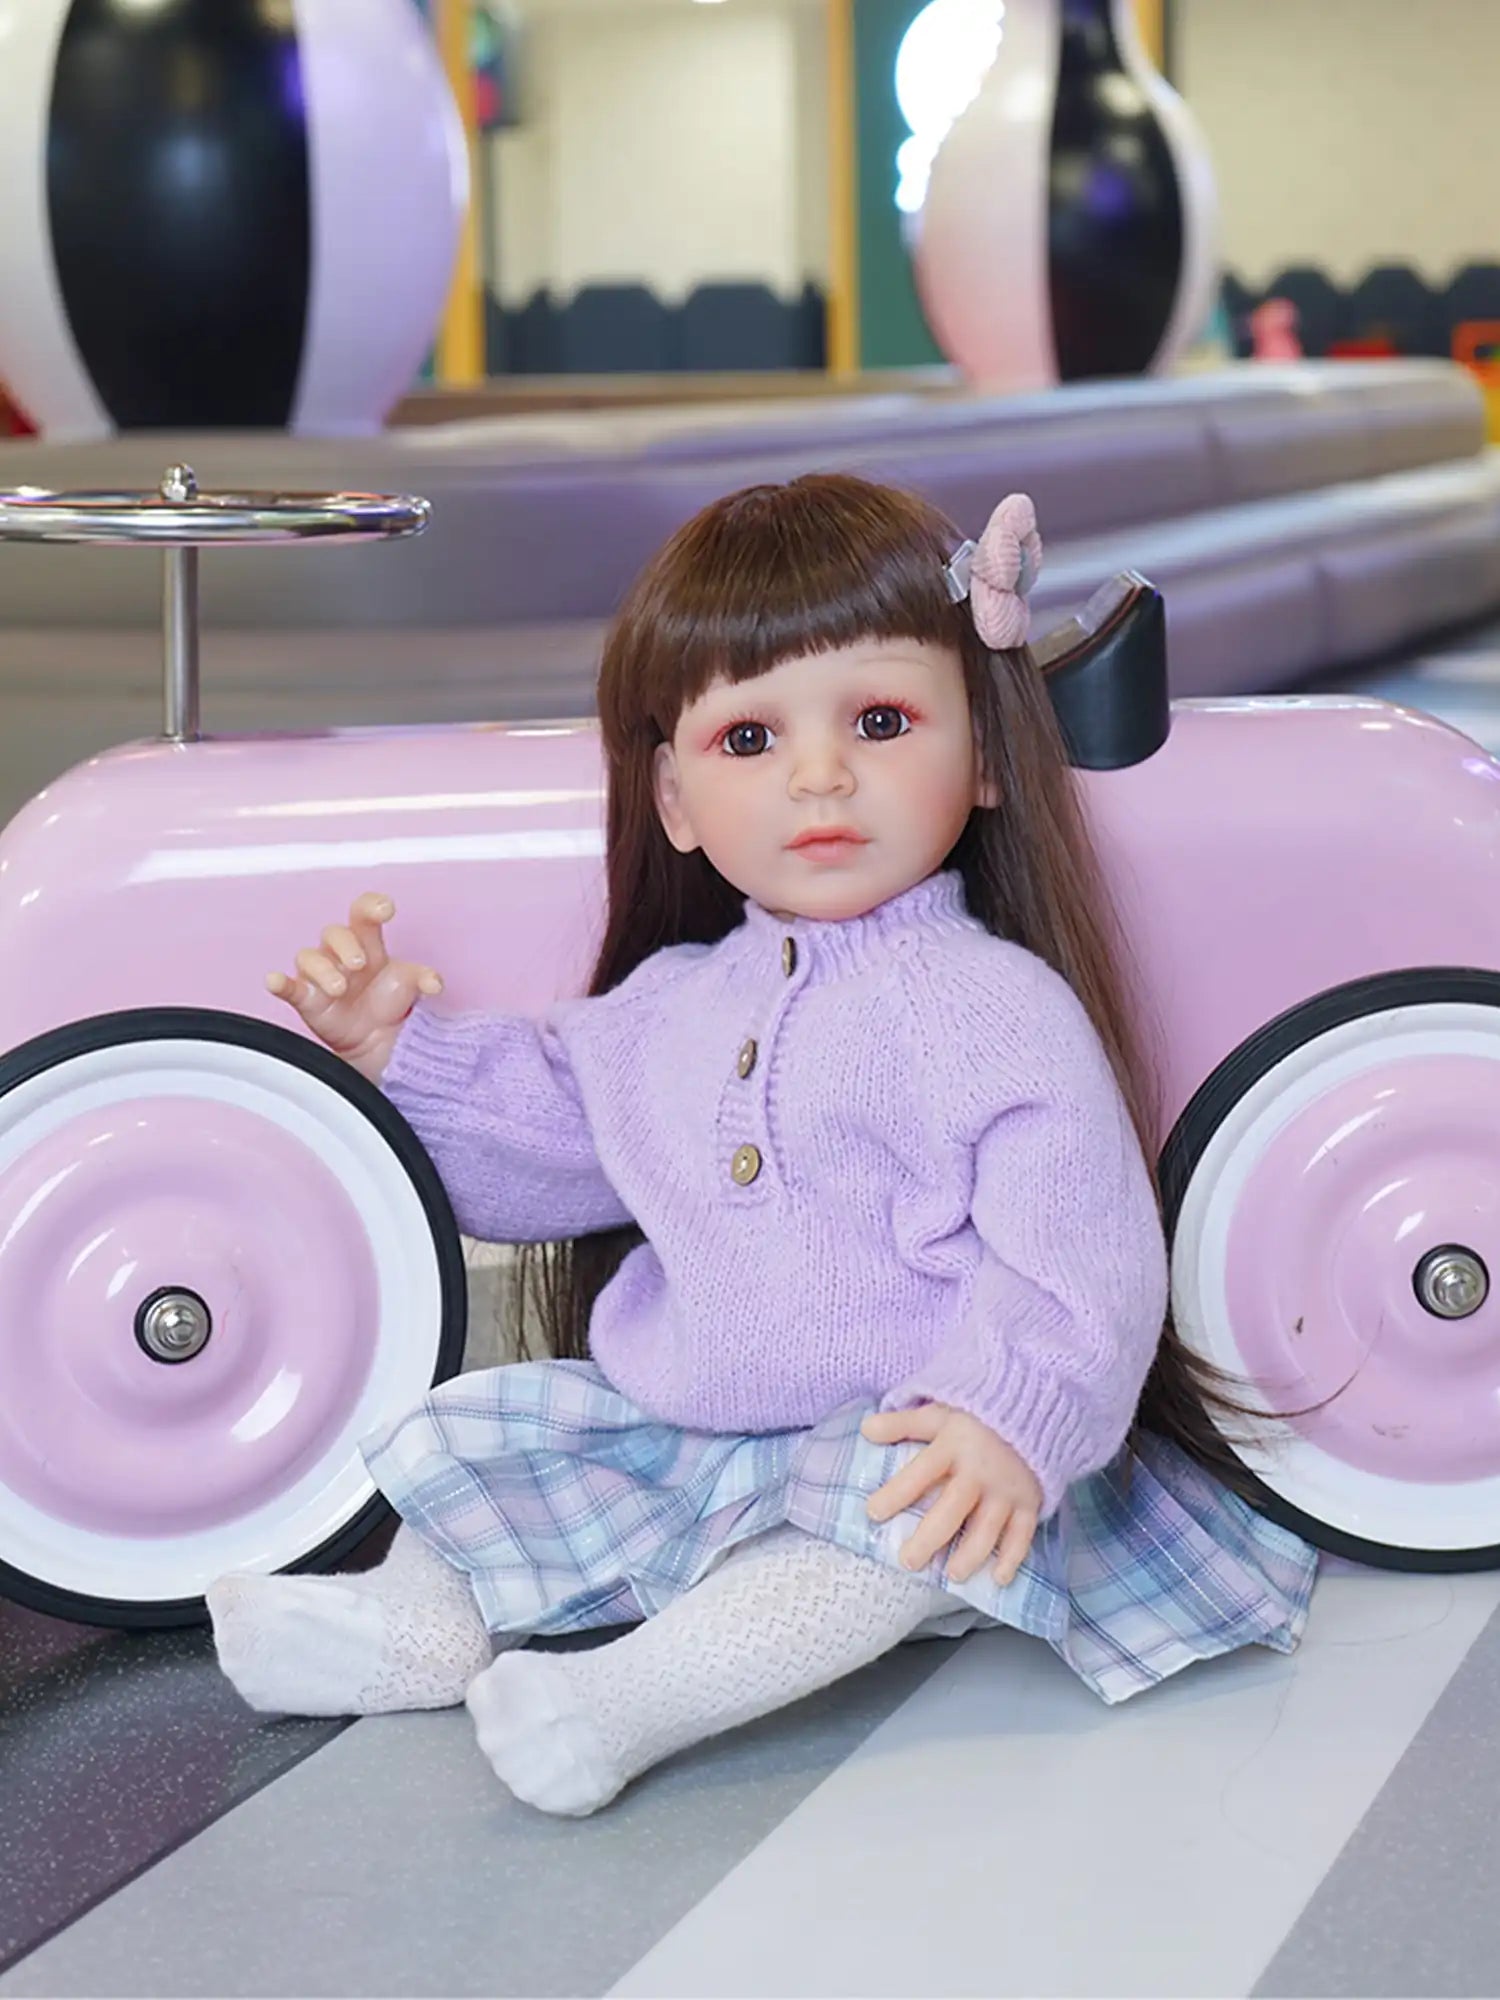 A toy toddler doll with a sweet face and brown hair with bangs, dressed in a pastel purple outfit, sitting by a toy car.